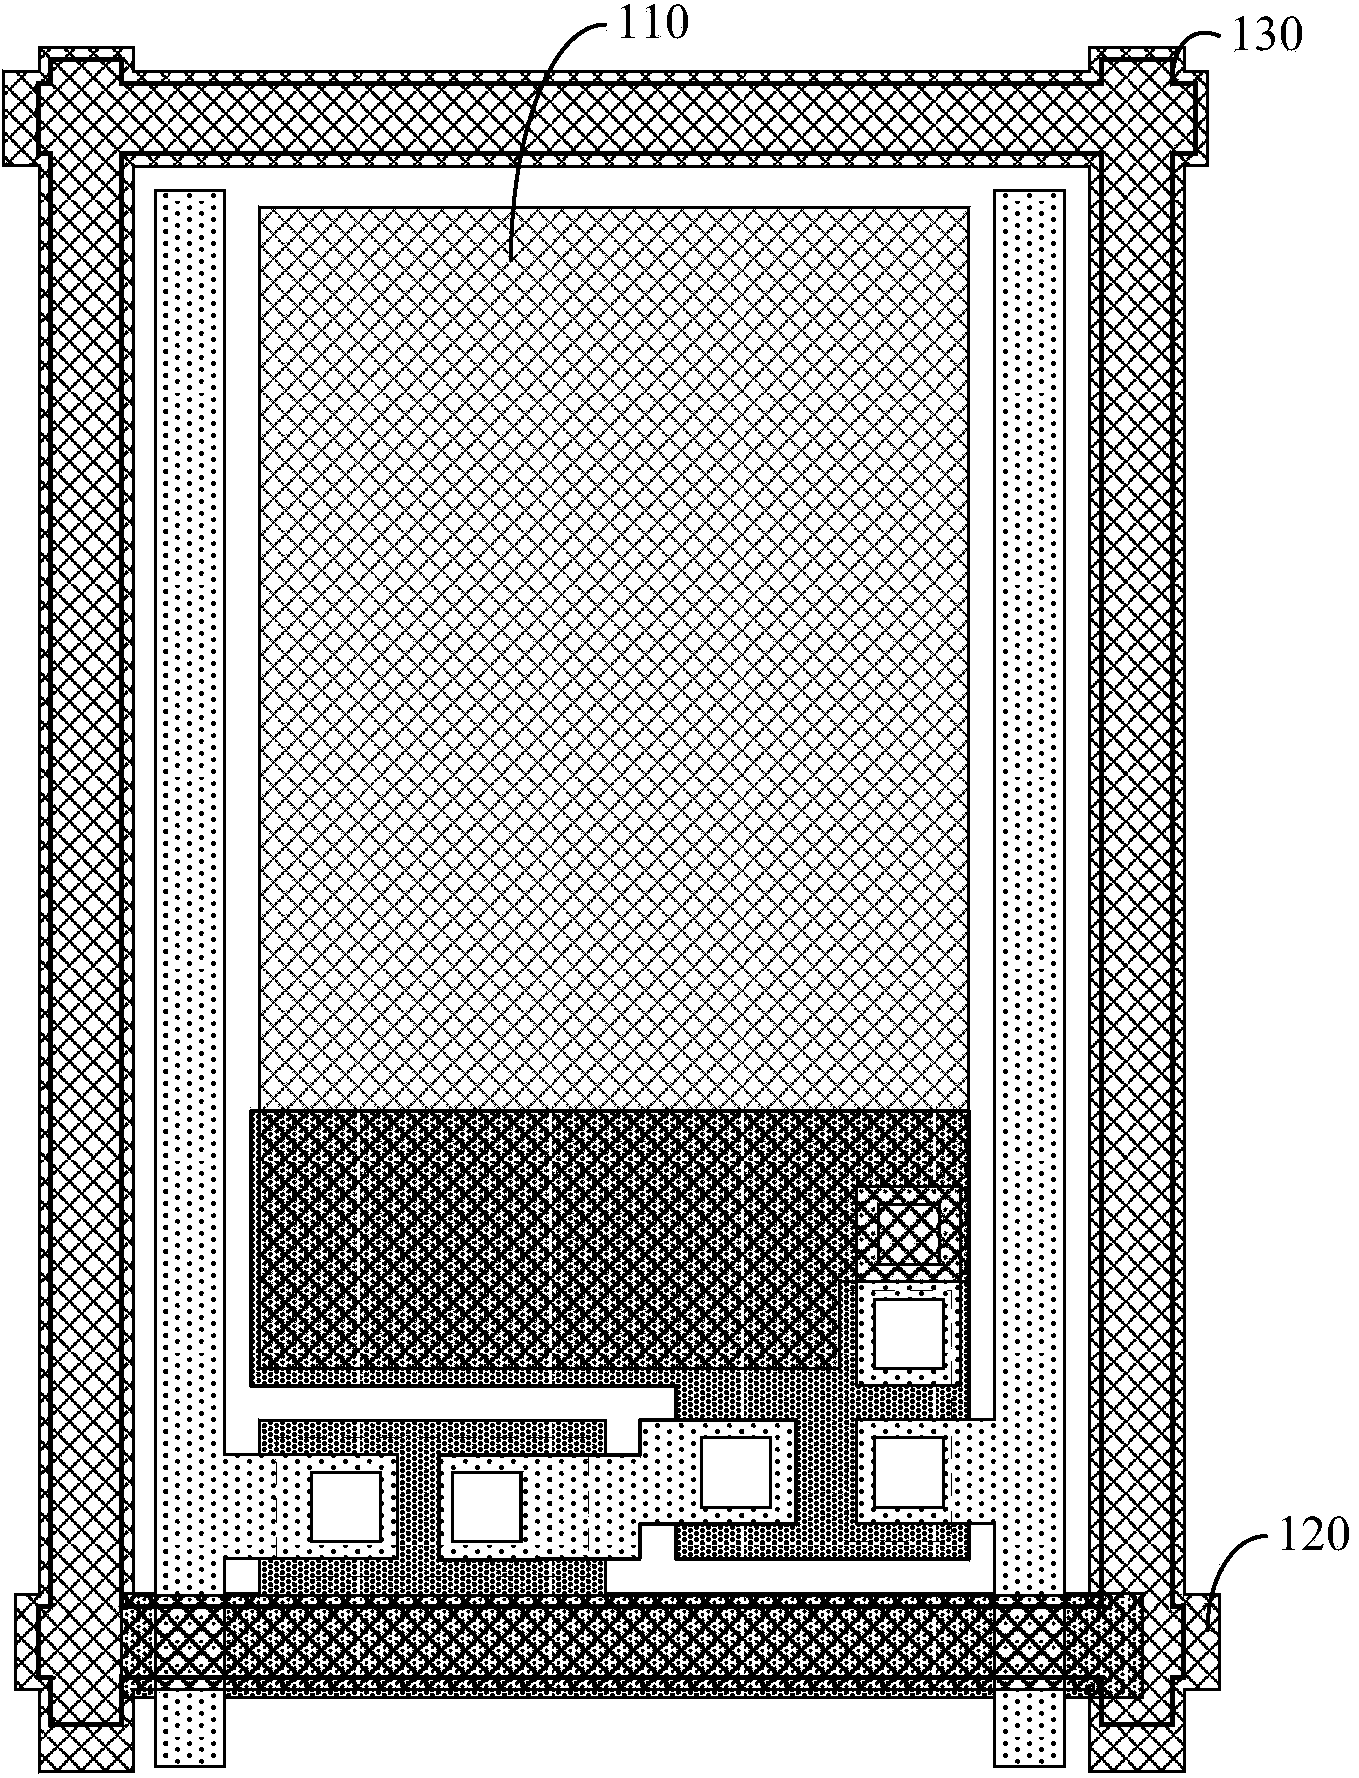 AMOLED array substrate and display device